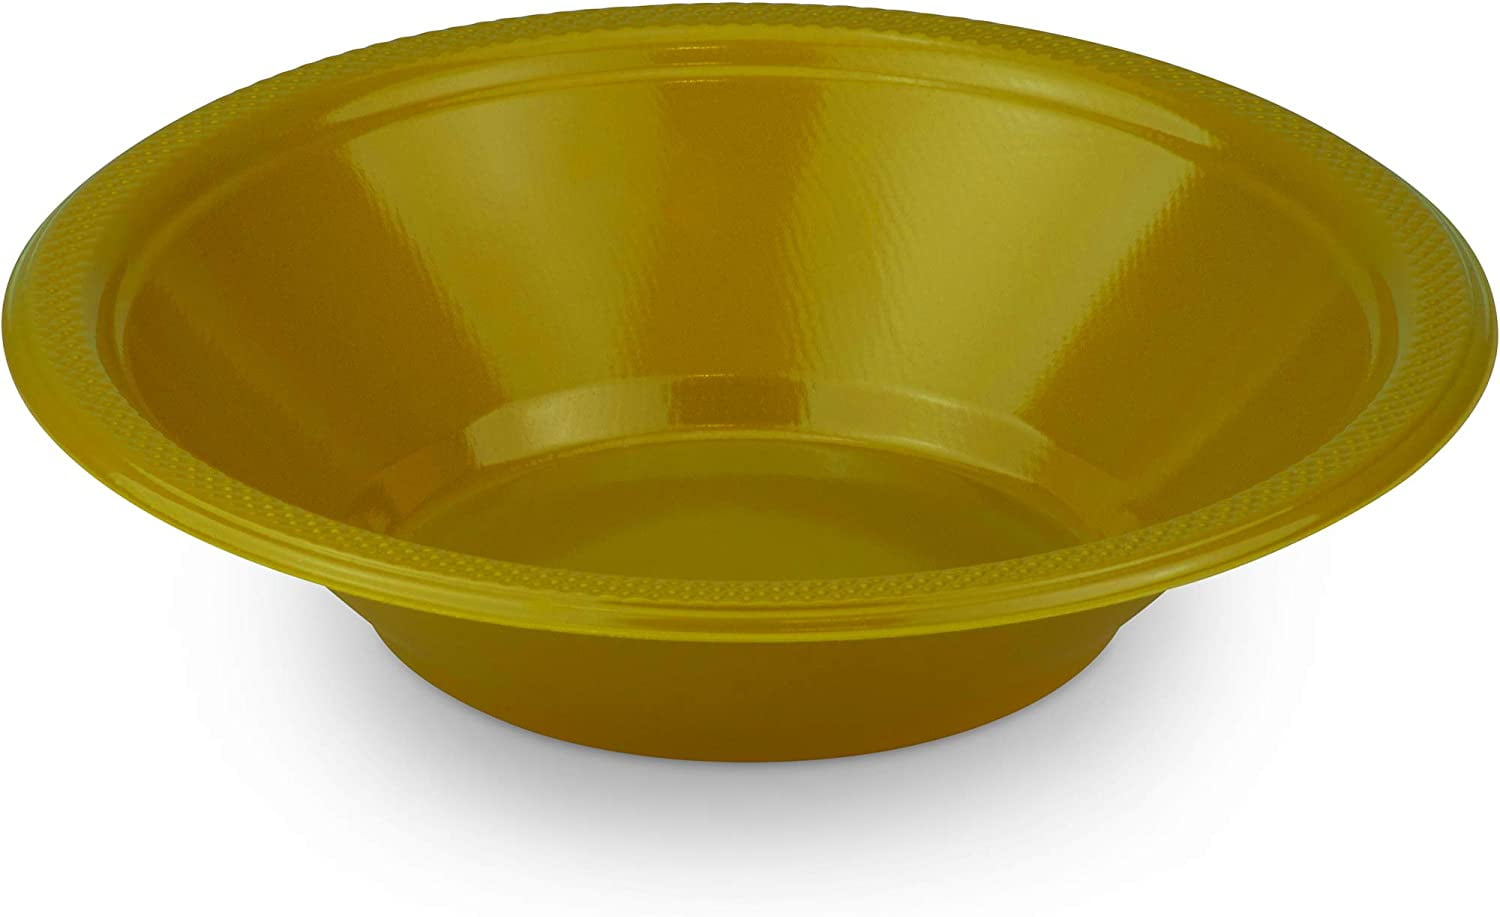 24 Pieces Dispozeit Plastic Bowl 7 In 12 Ct Red - Disposable Plates & Bowls  - at 